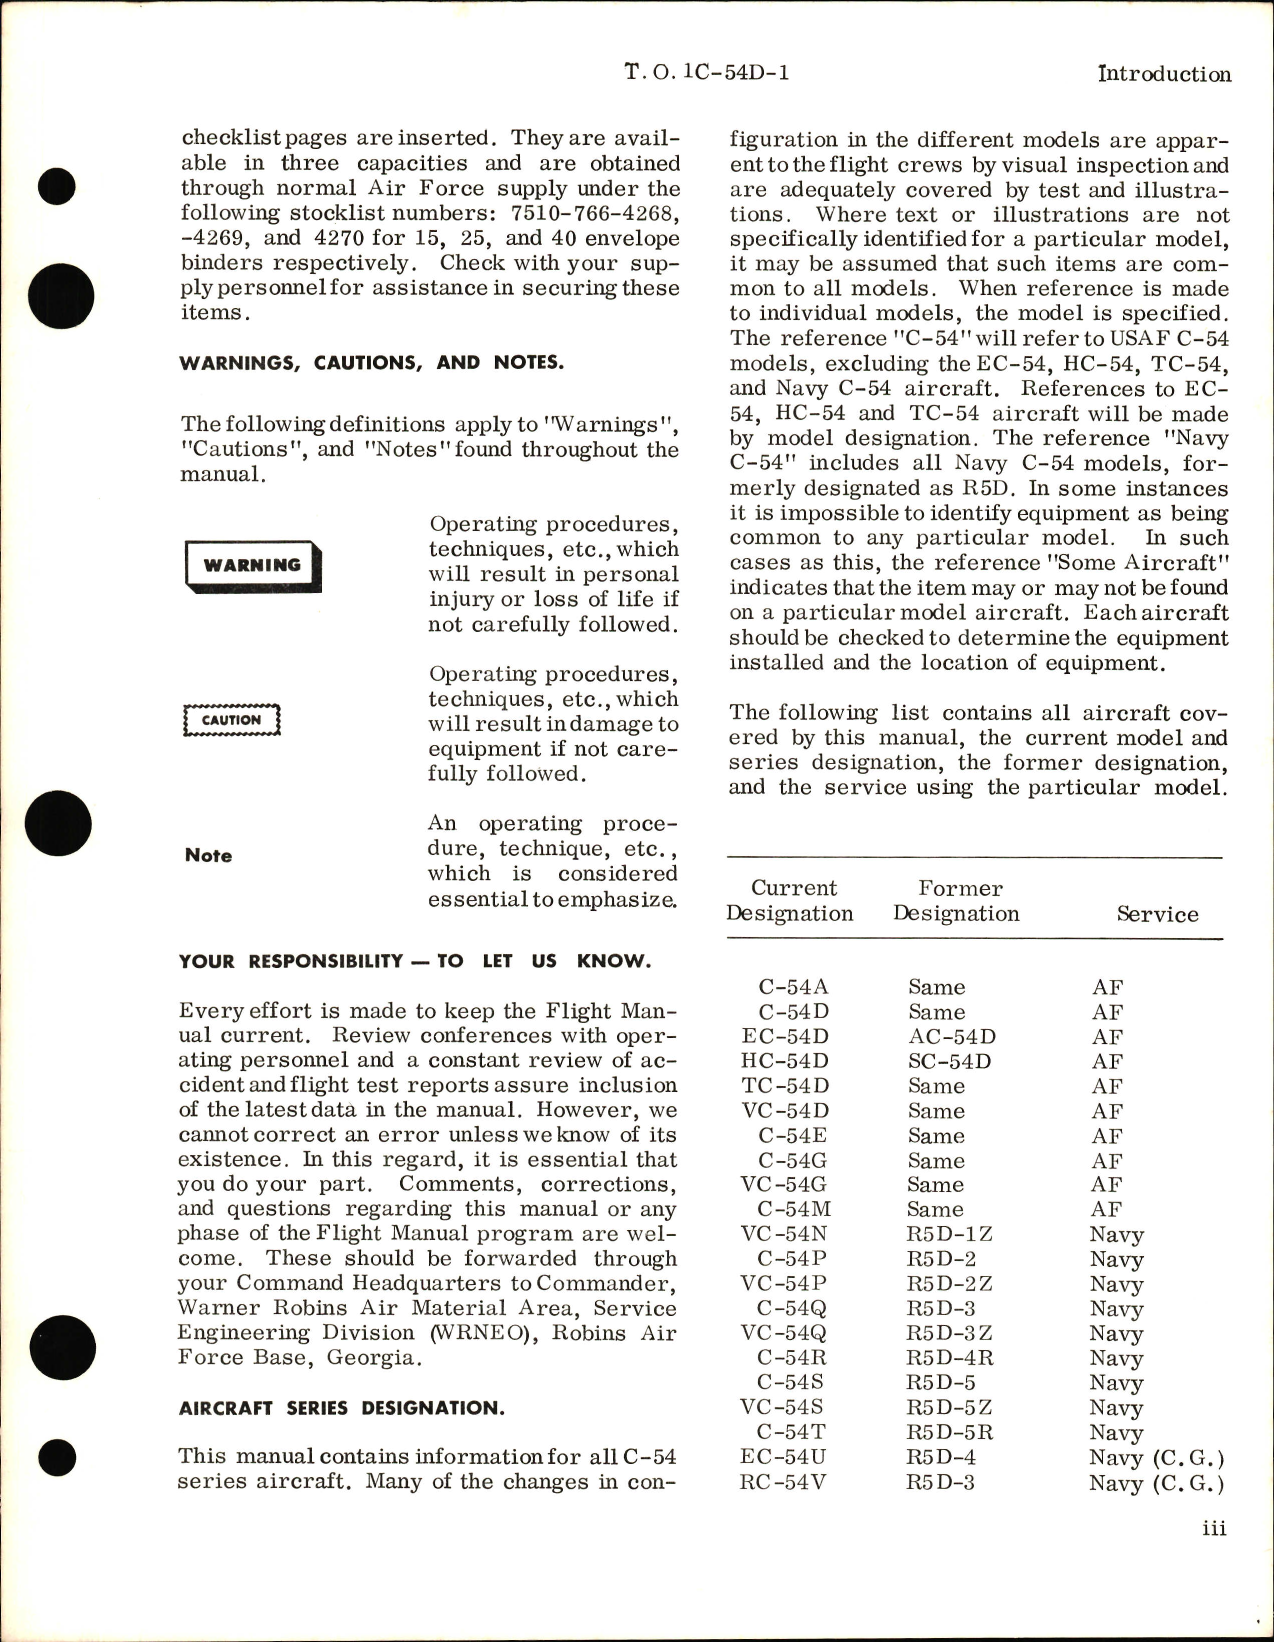 Sample page 5 from AirCorps Library document: Flight Manual for C-54